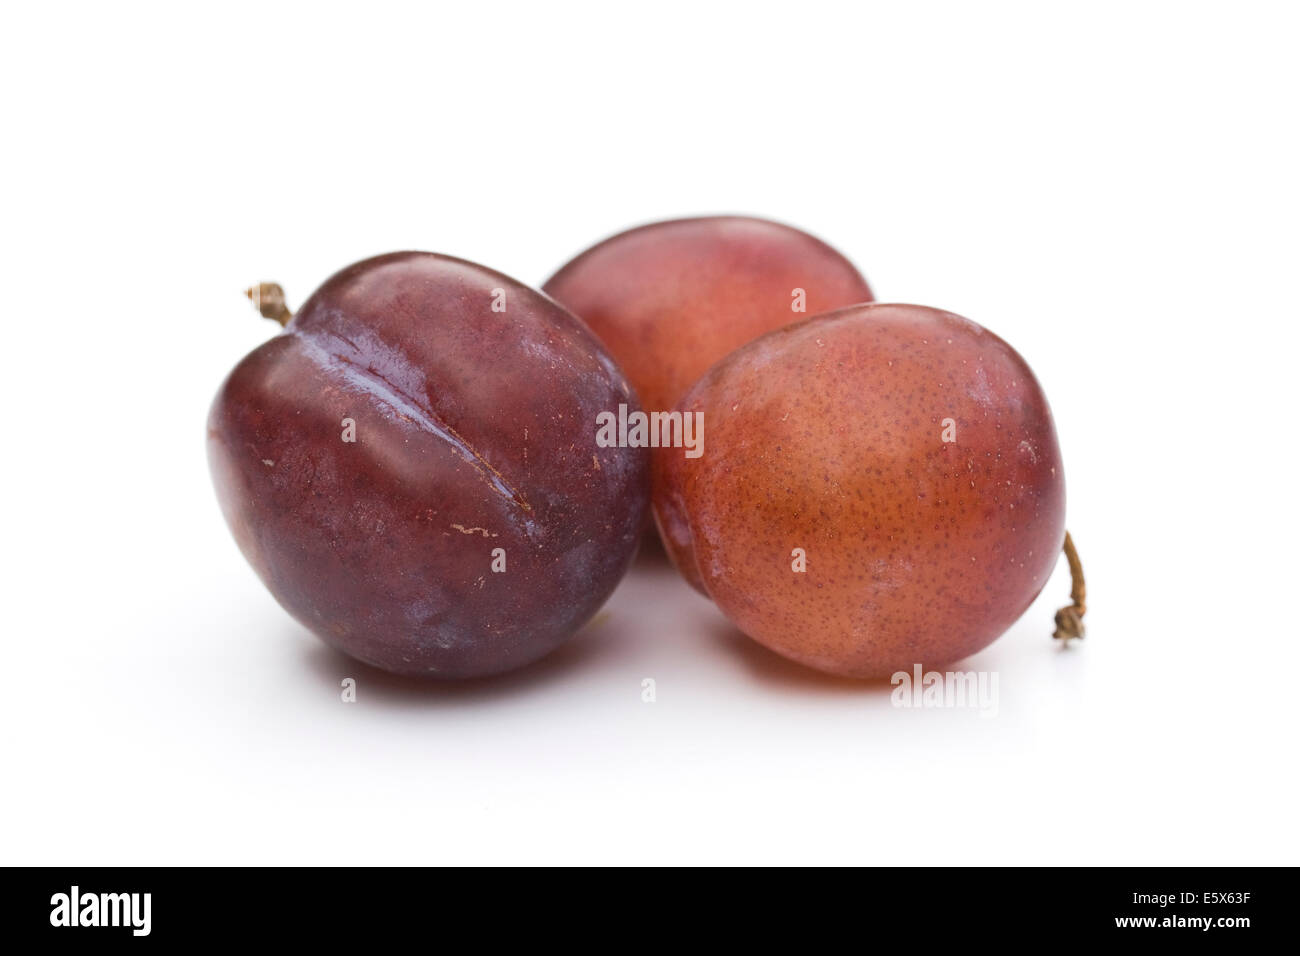 Three plums on a white background. Stock Photo